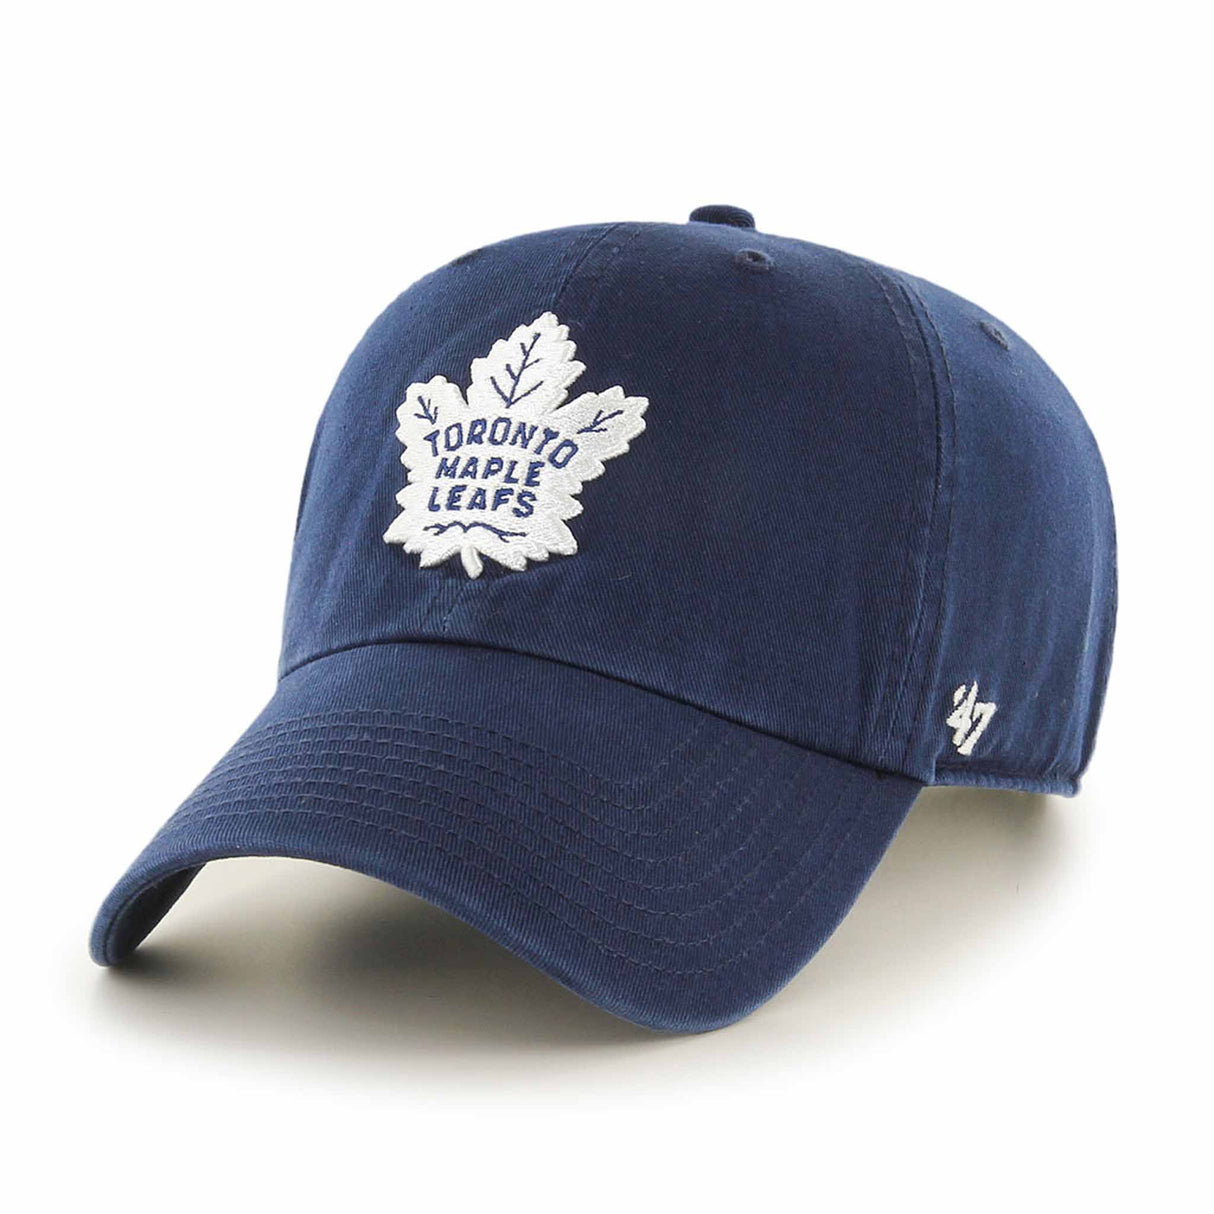 Casquette 47 Brand Clean Up NHL Toronto Maple Leafs